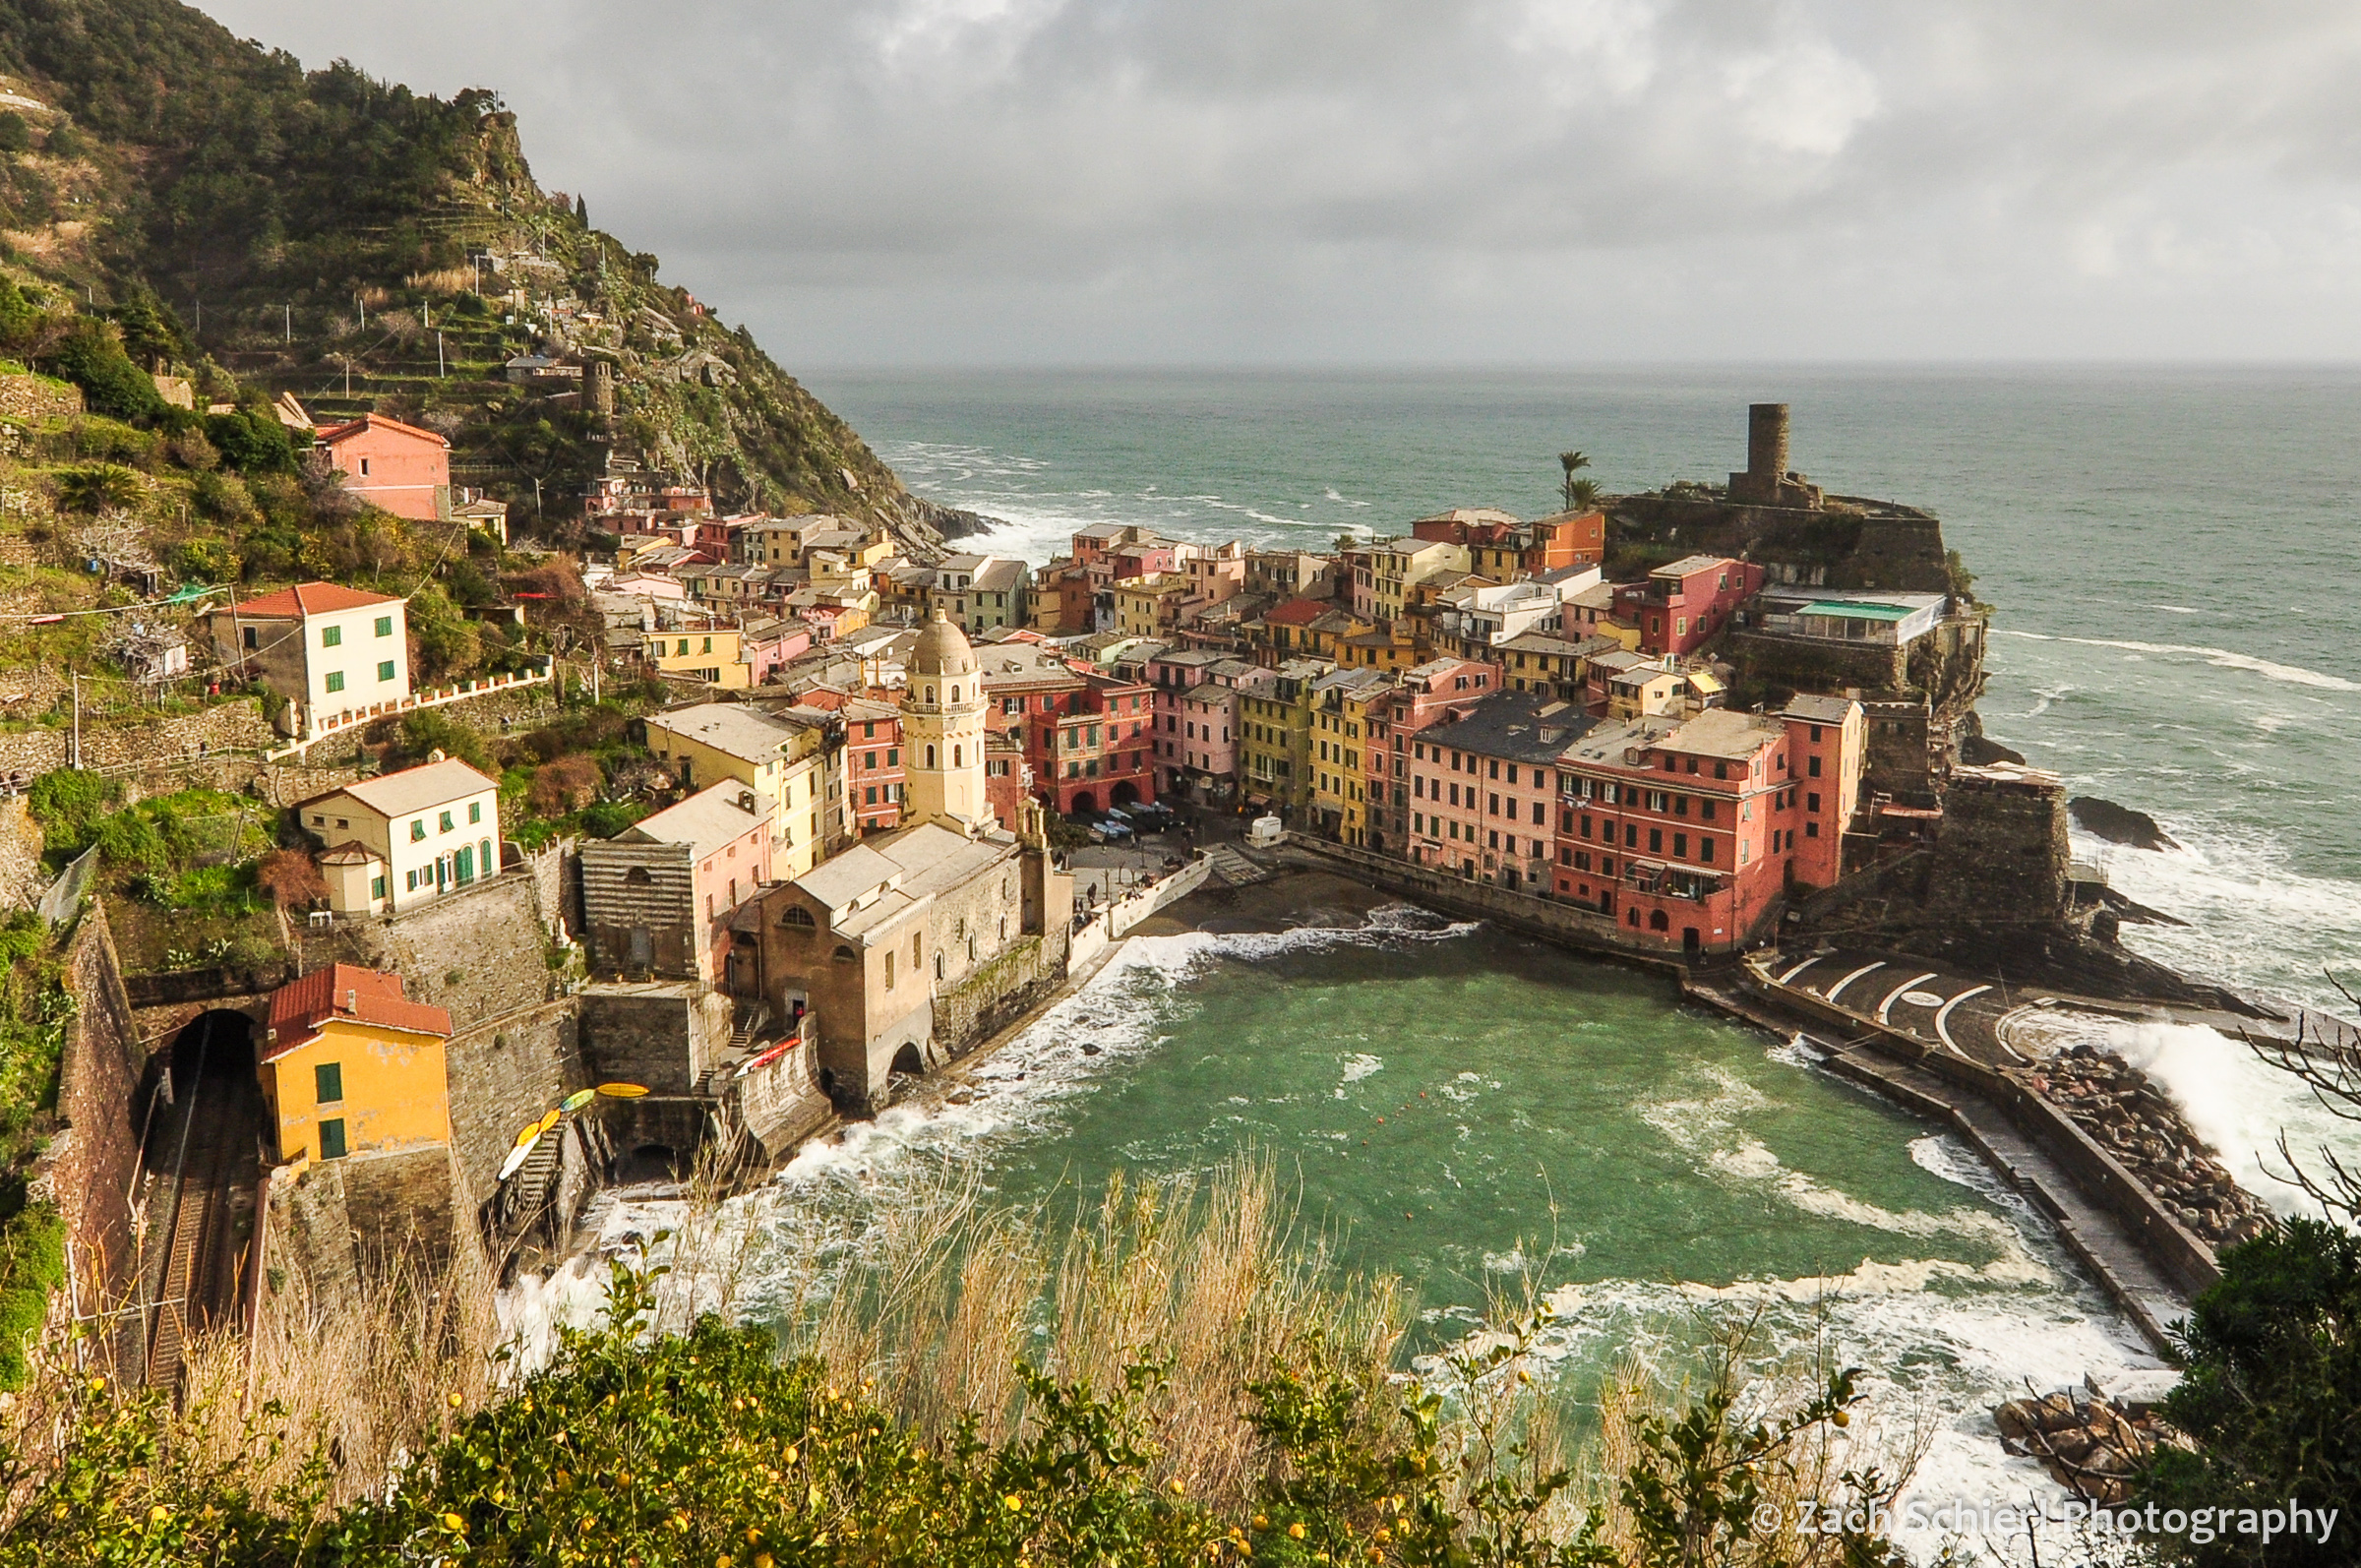 Coloful buildings line the harbor in the village of Vernazza